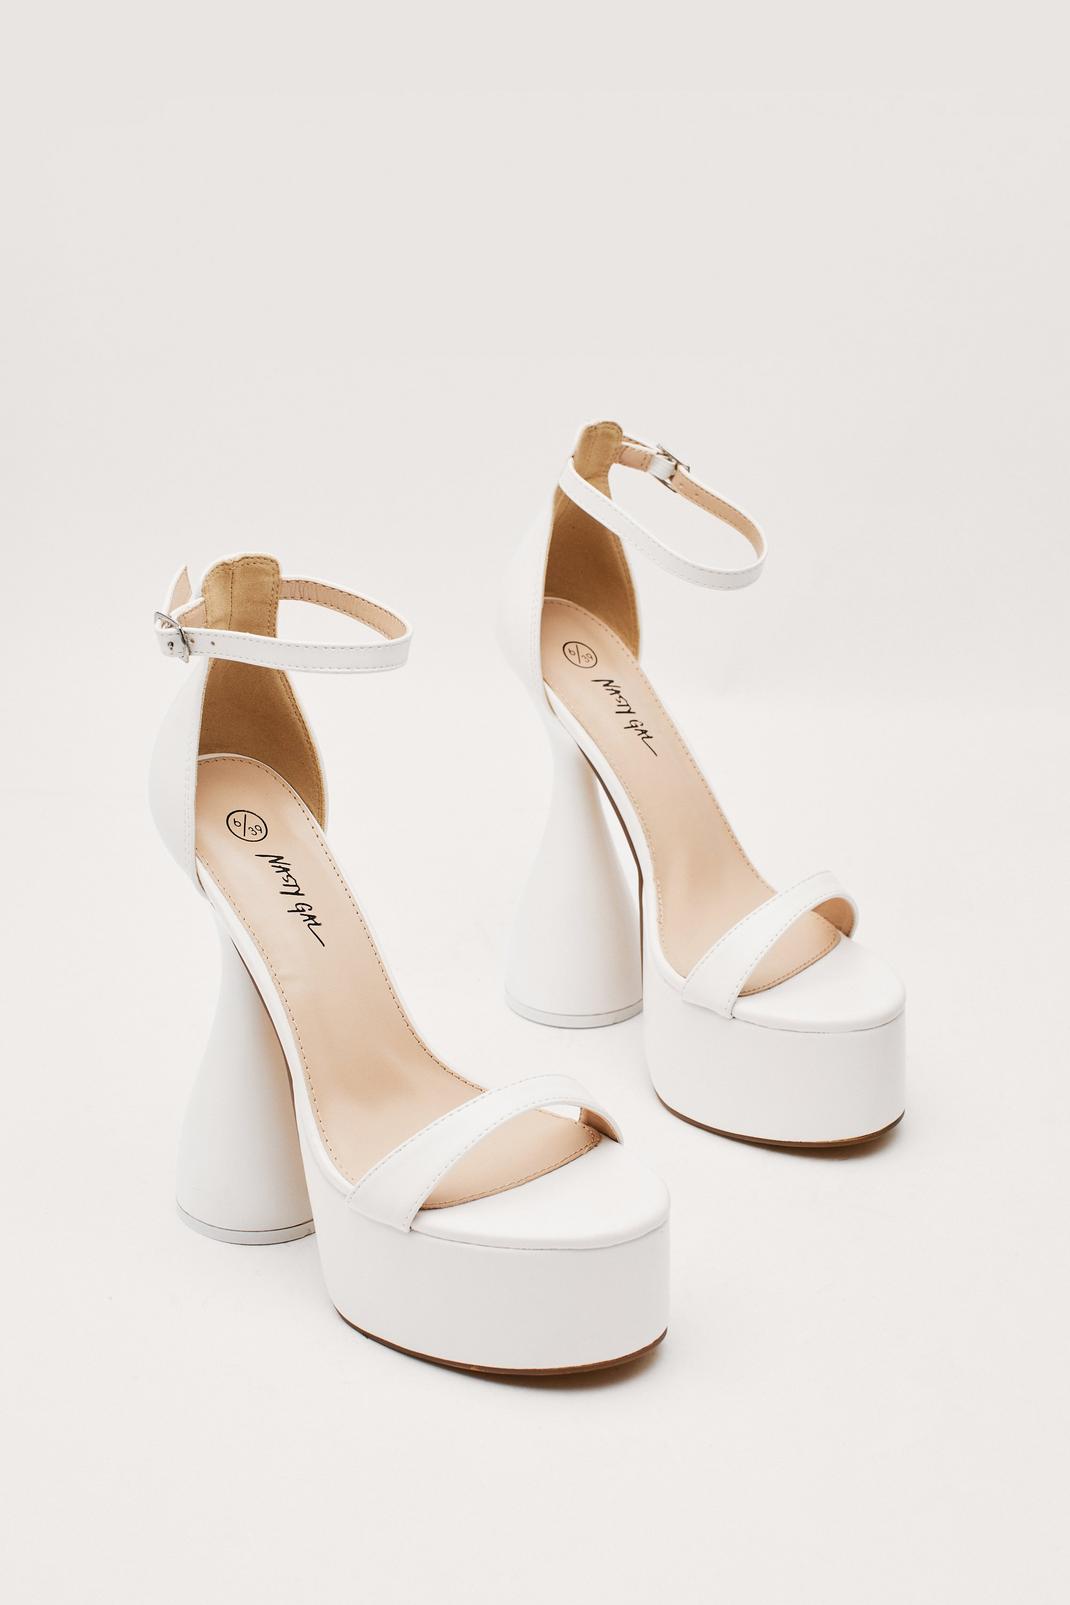 White Faux Leather Strappy Spool Heel Platform Shoes image number 1